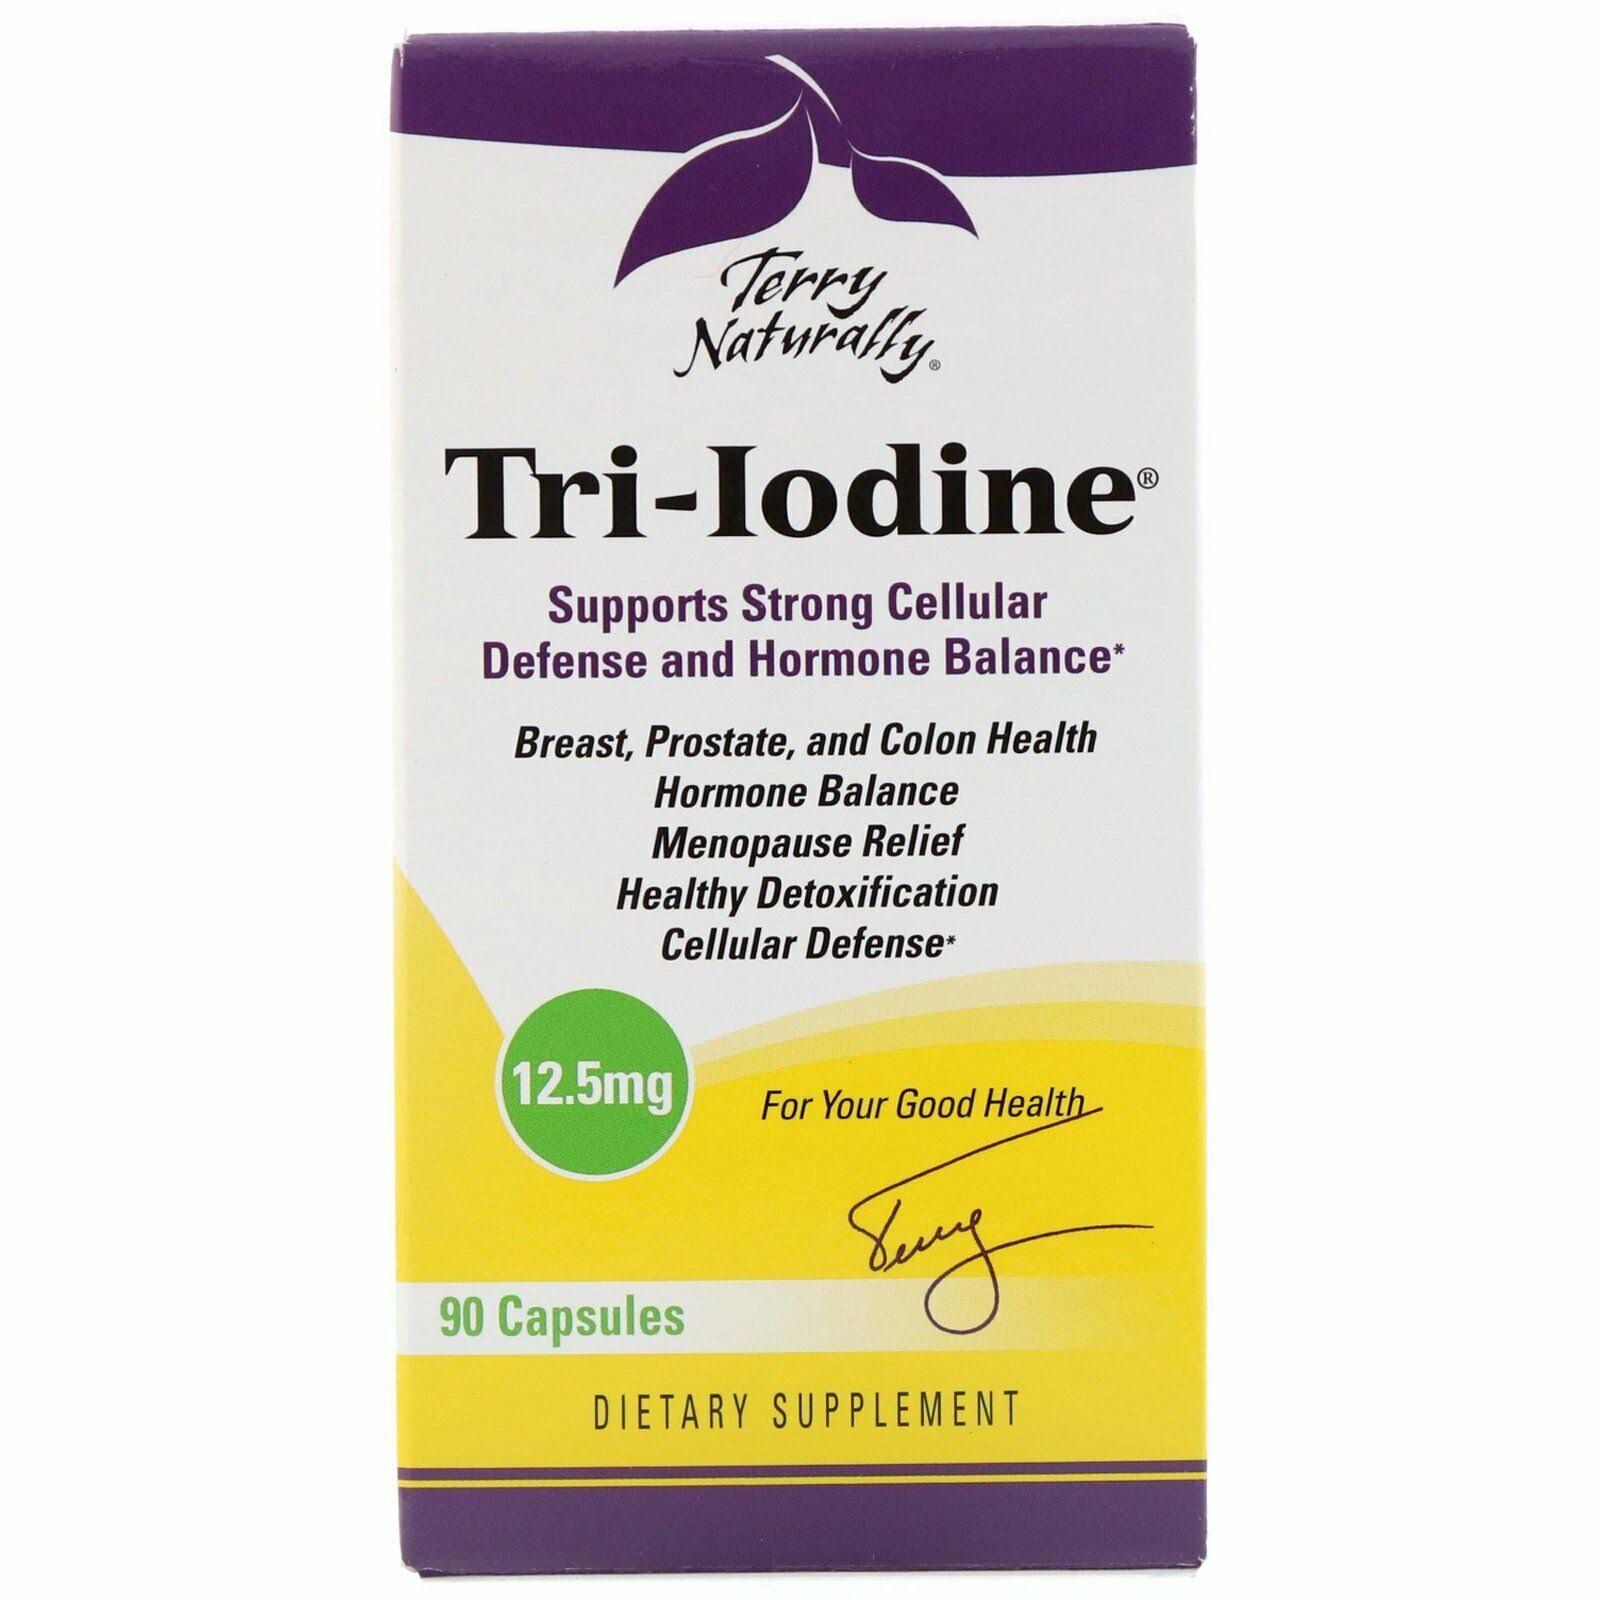 Terry Naturally Tri-Iodine Dietary Supplement - 90 Capsules